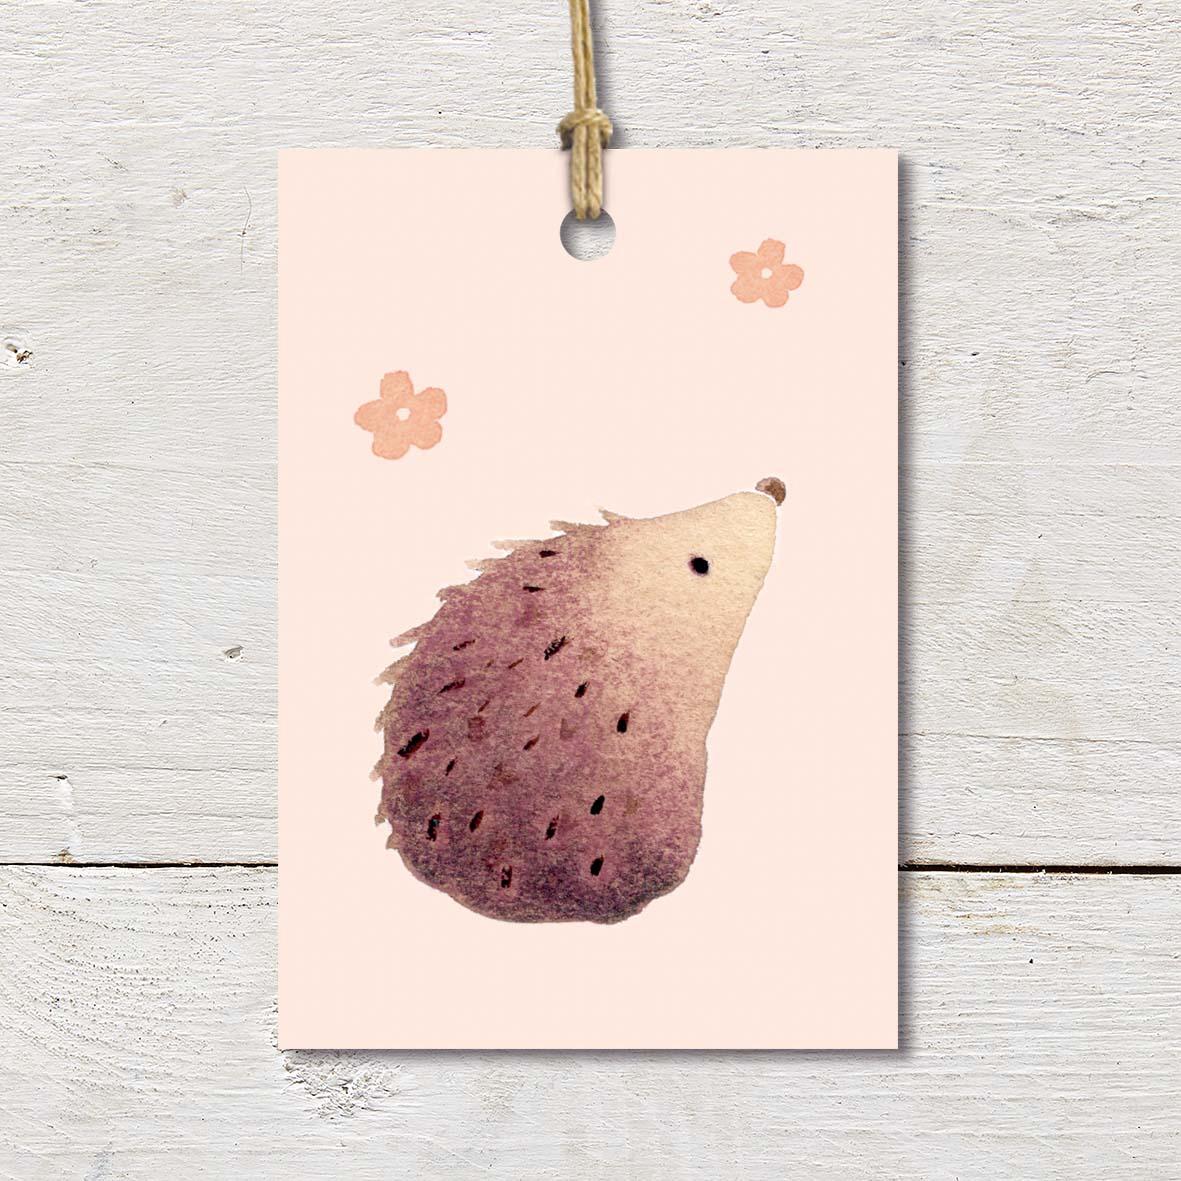 Gift Tag featuring a cute hedgehog on a pale peach background.